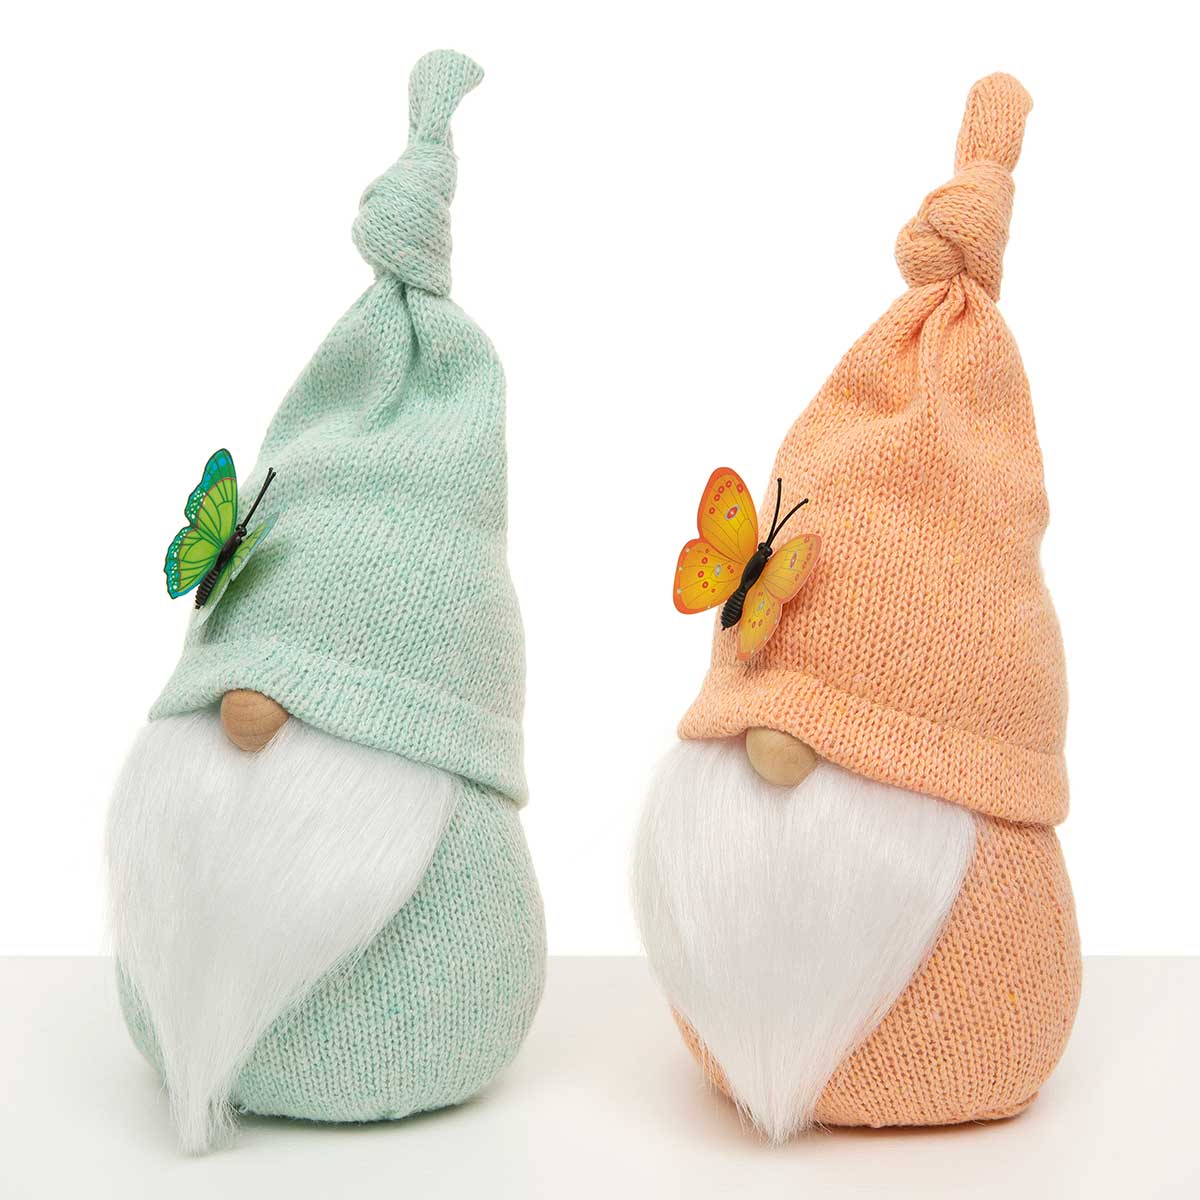 BUTTERFLY GNOME PEACH/GREEN 2 ASSORTED LARGE 4"X10"